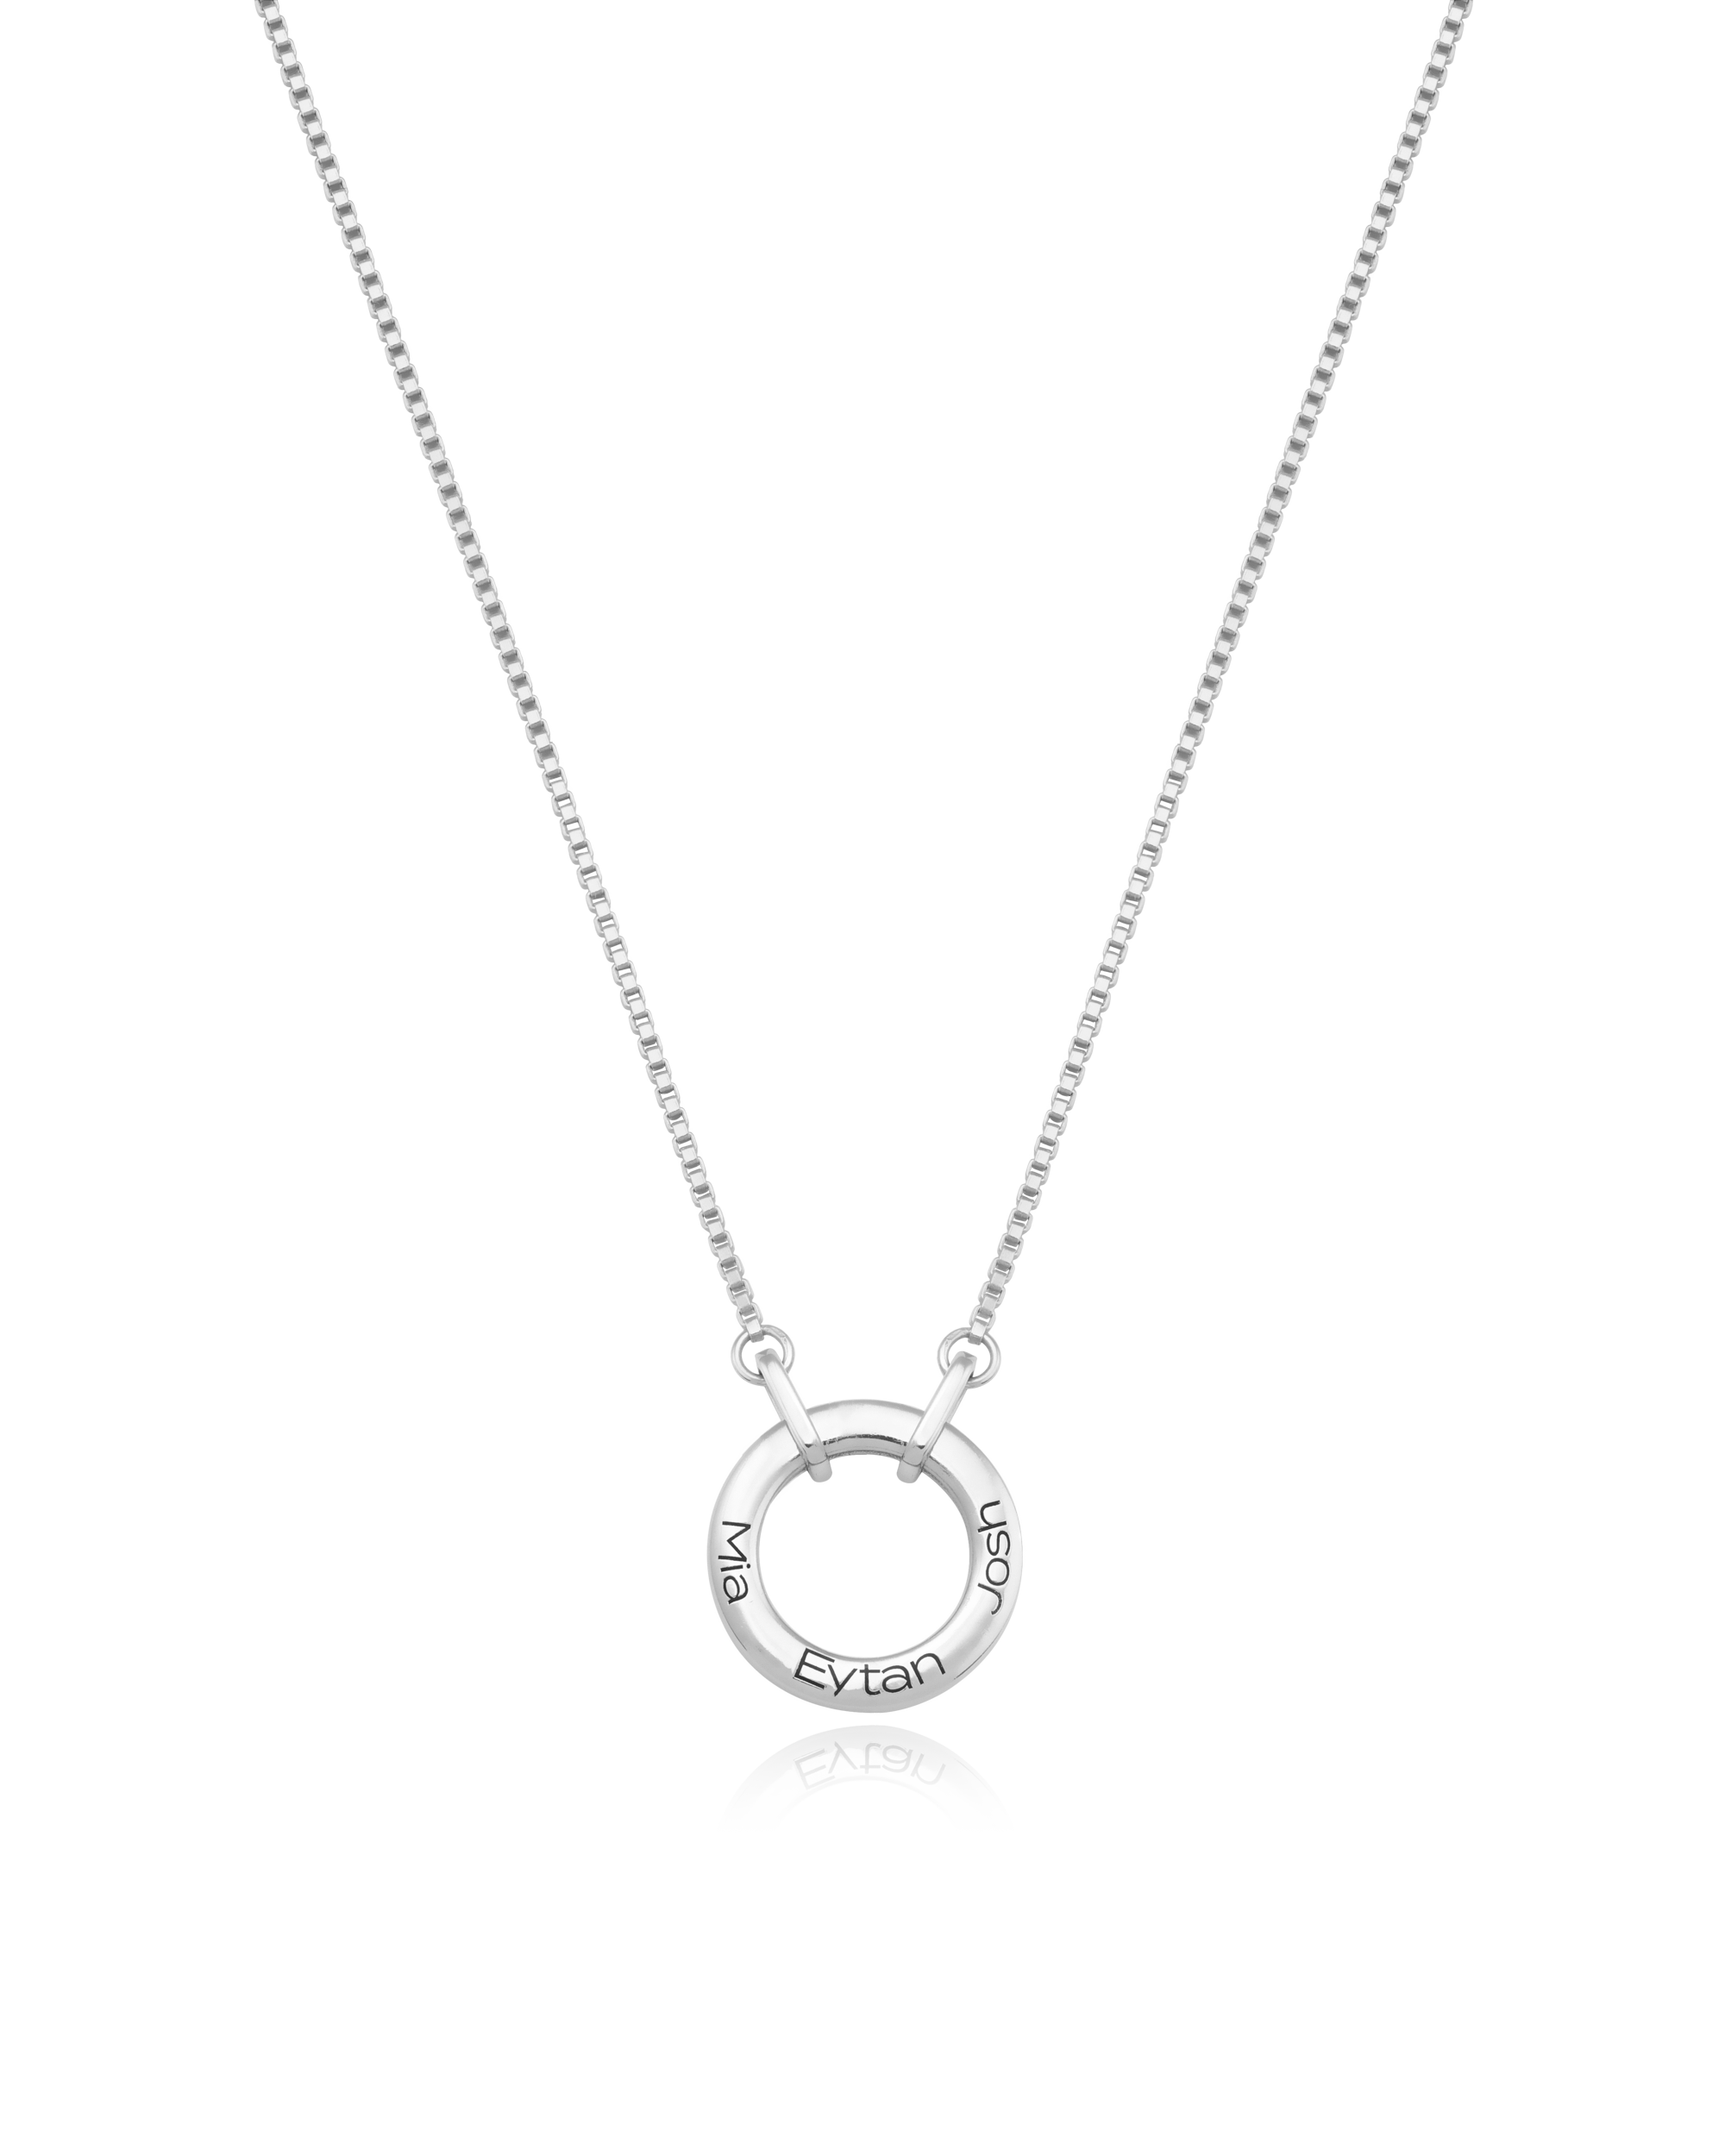 Engraved Family Circle Necklace for Mom in Sterling Silver - MYKA